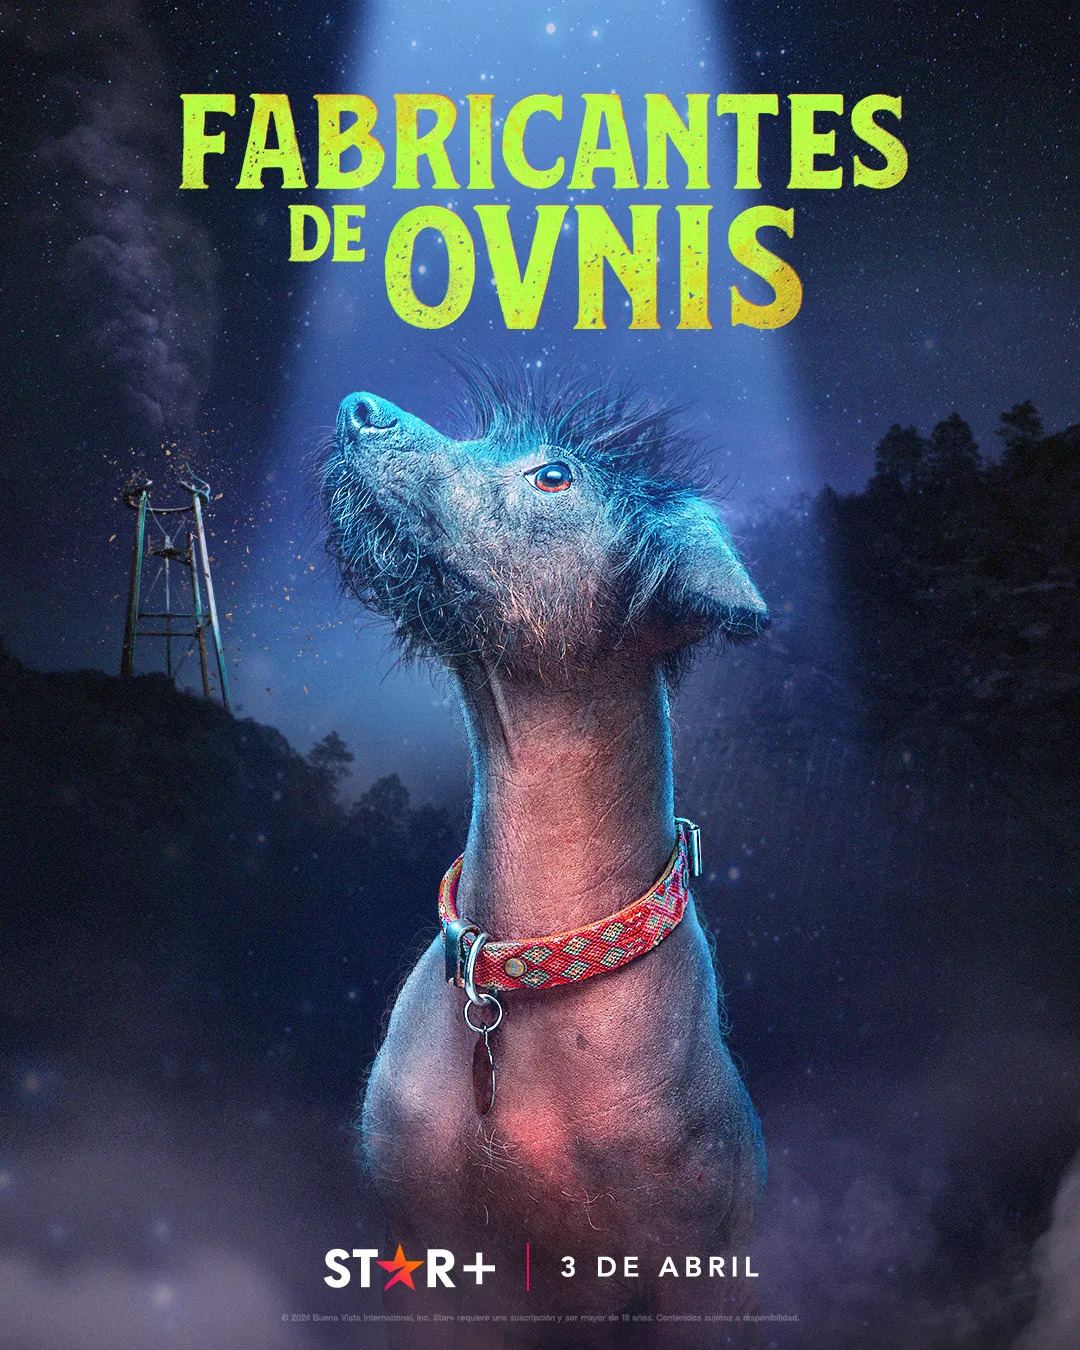 Extra Large TV Poster Image for Fabricante de ovnis (#11 of 11)